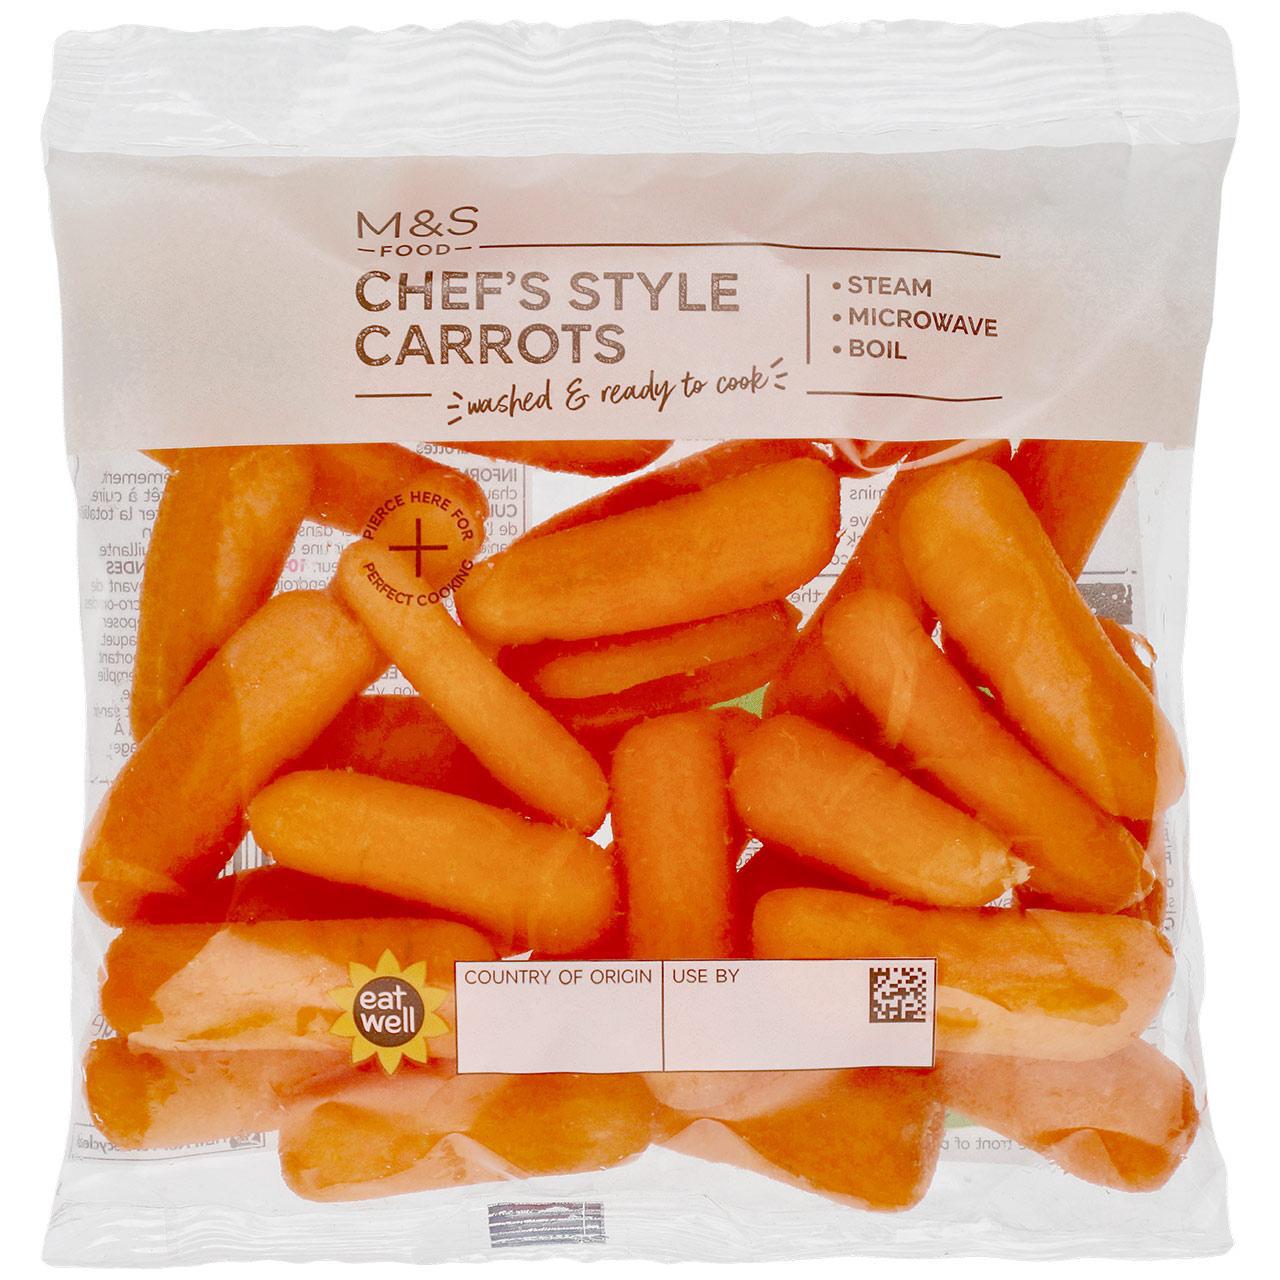 M&S Chef's Style Carrots 240g